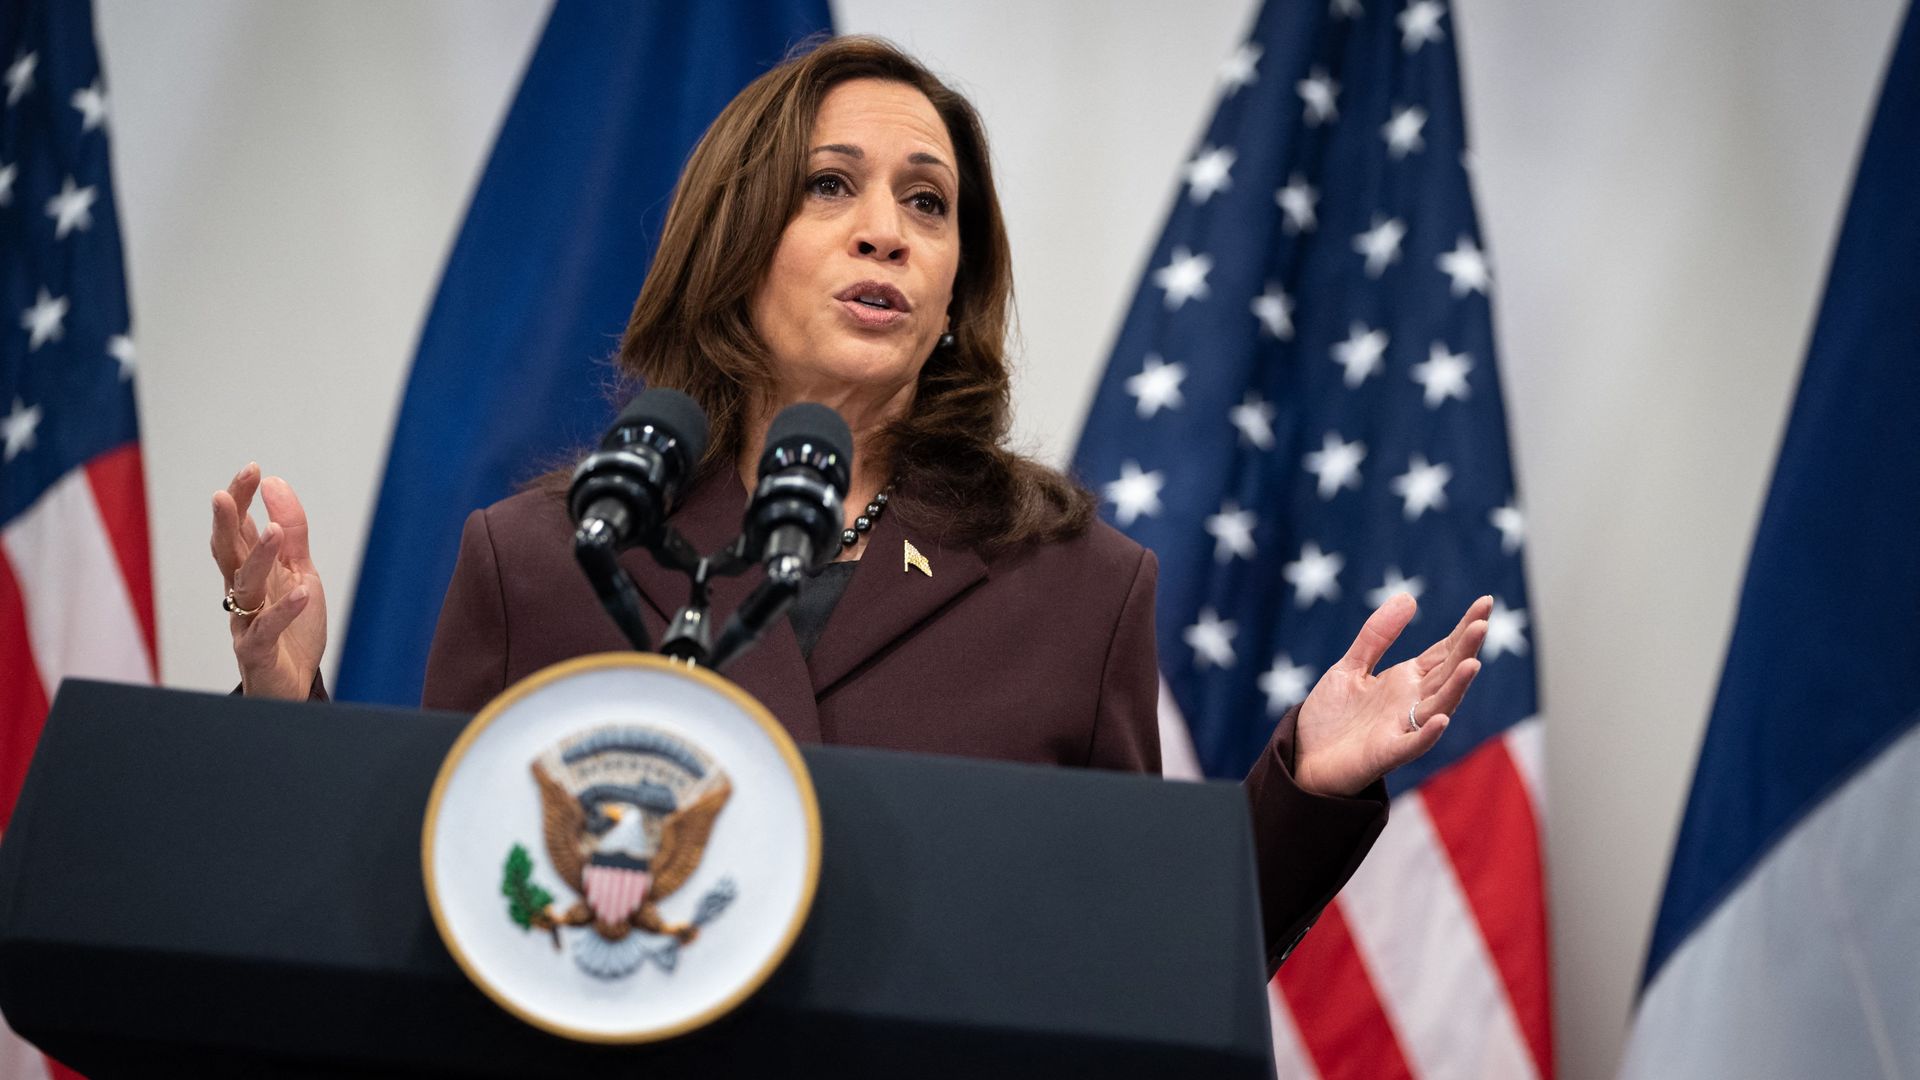 U.S. Vice President Kamala Harris speaks at a podium with an American flag in the background